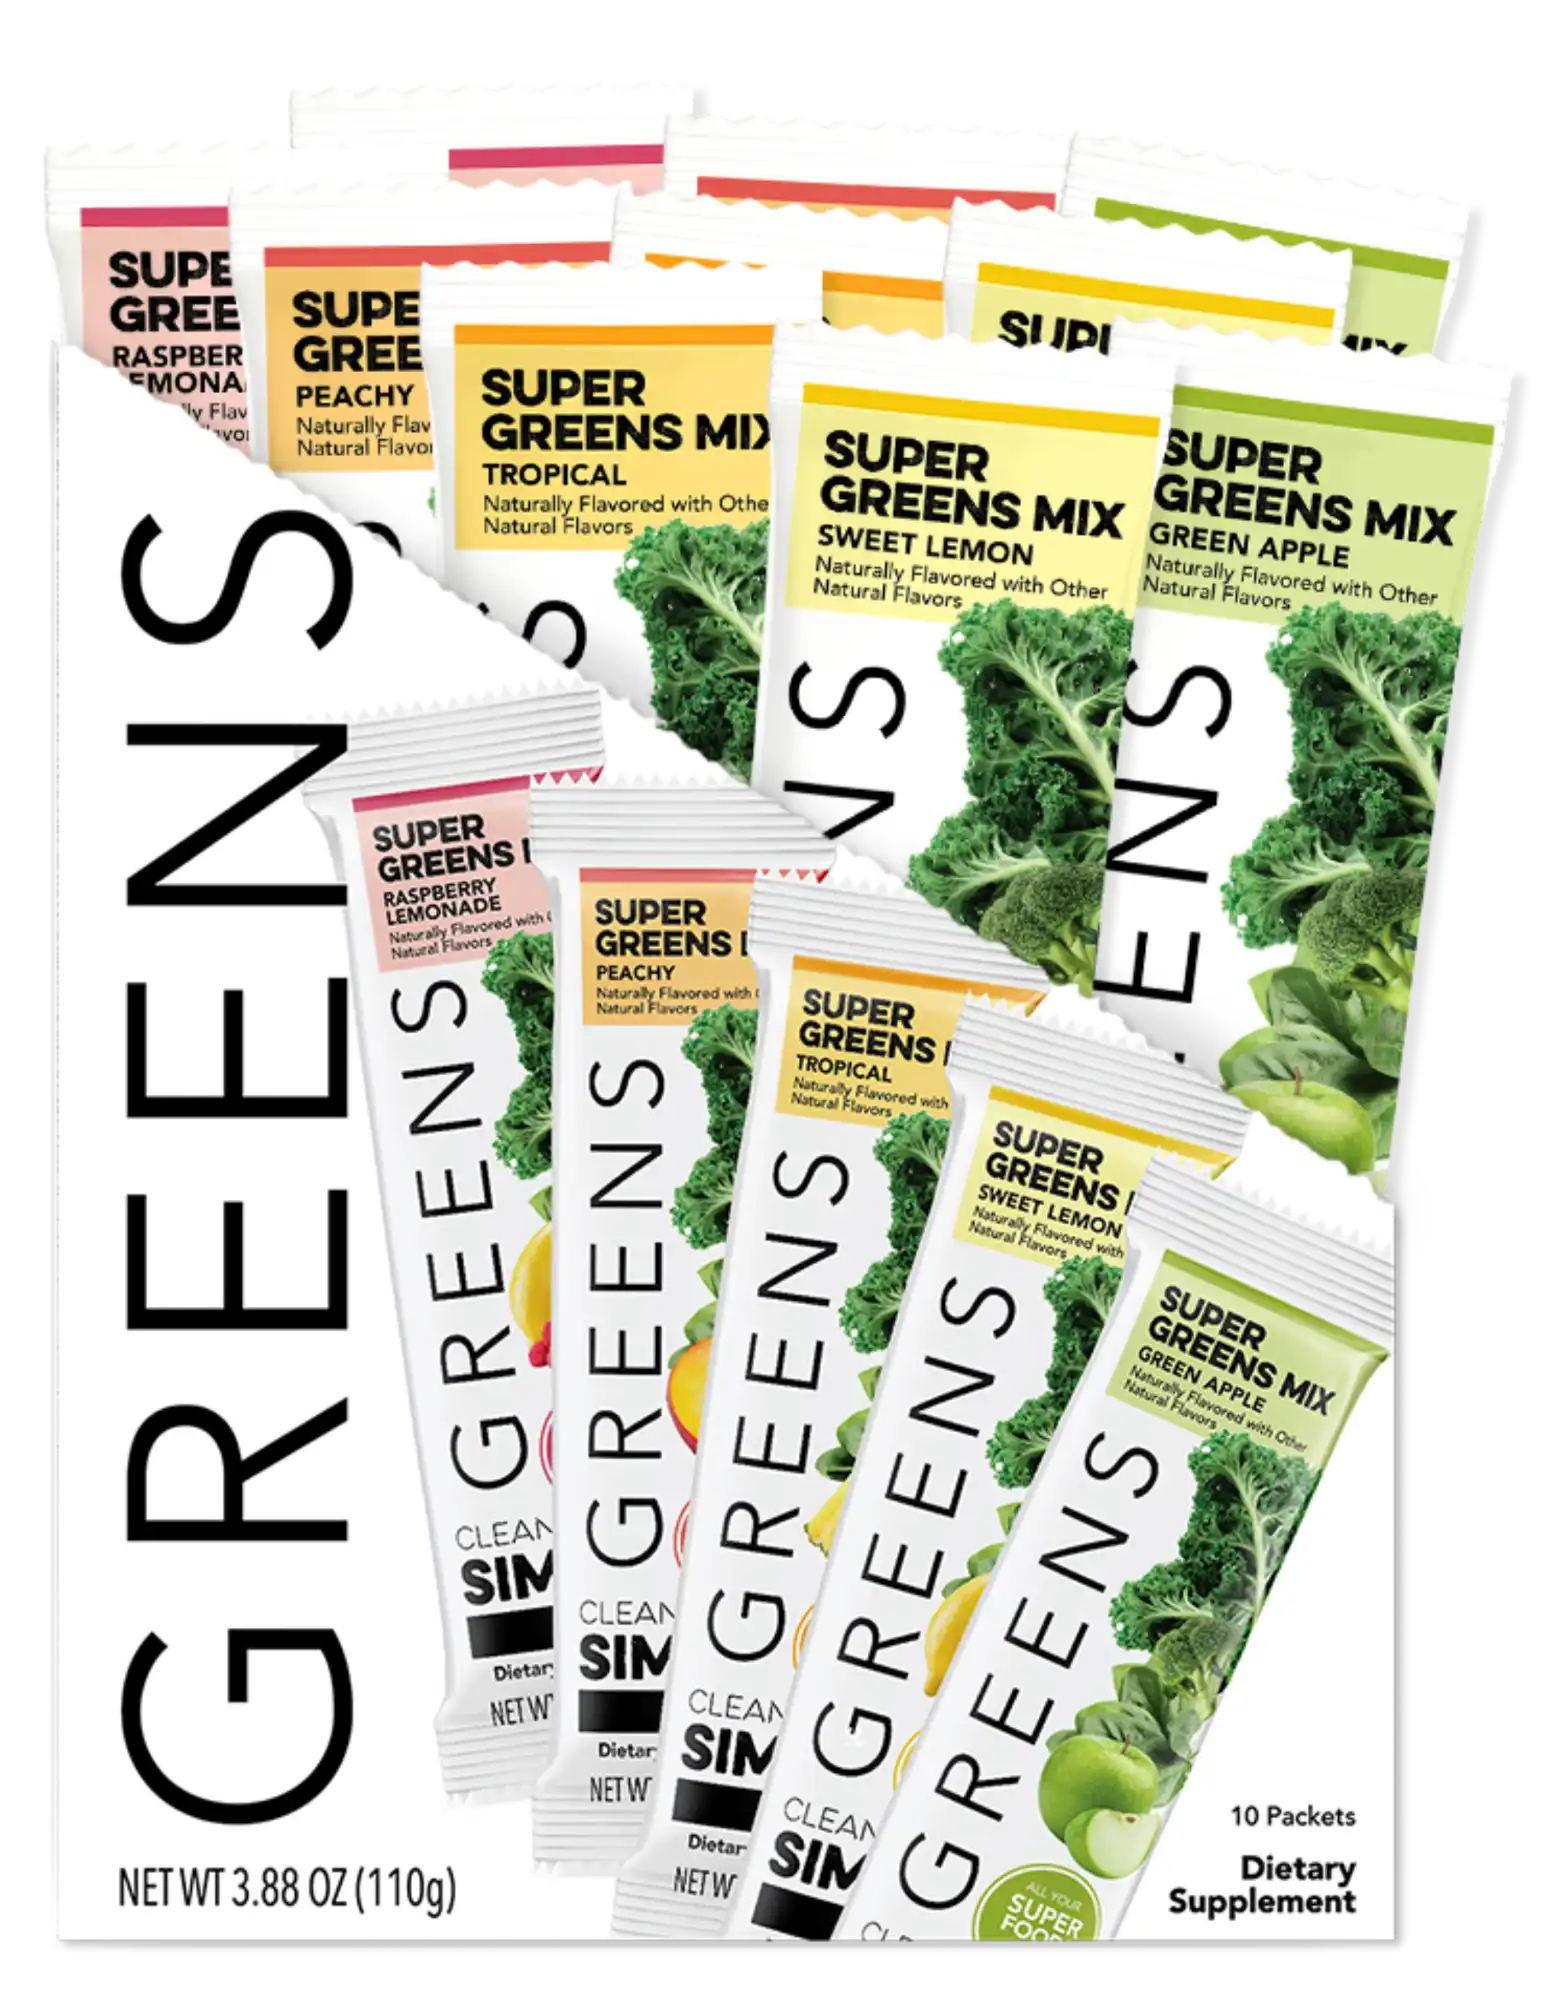 Greens Mix Variety Pack (10 Single Serving Stick Packs)